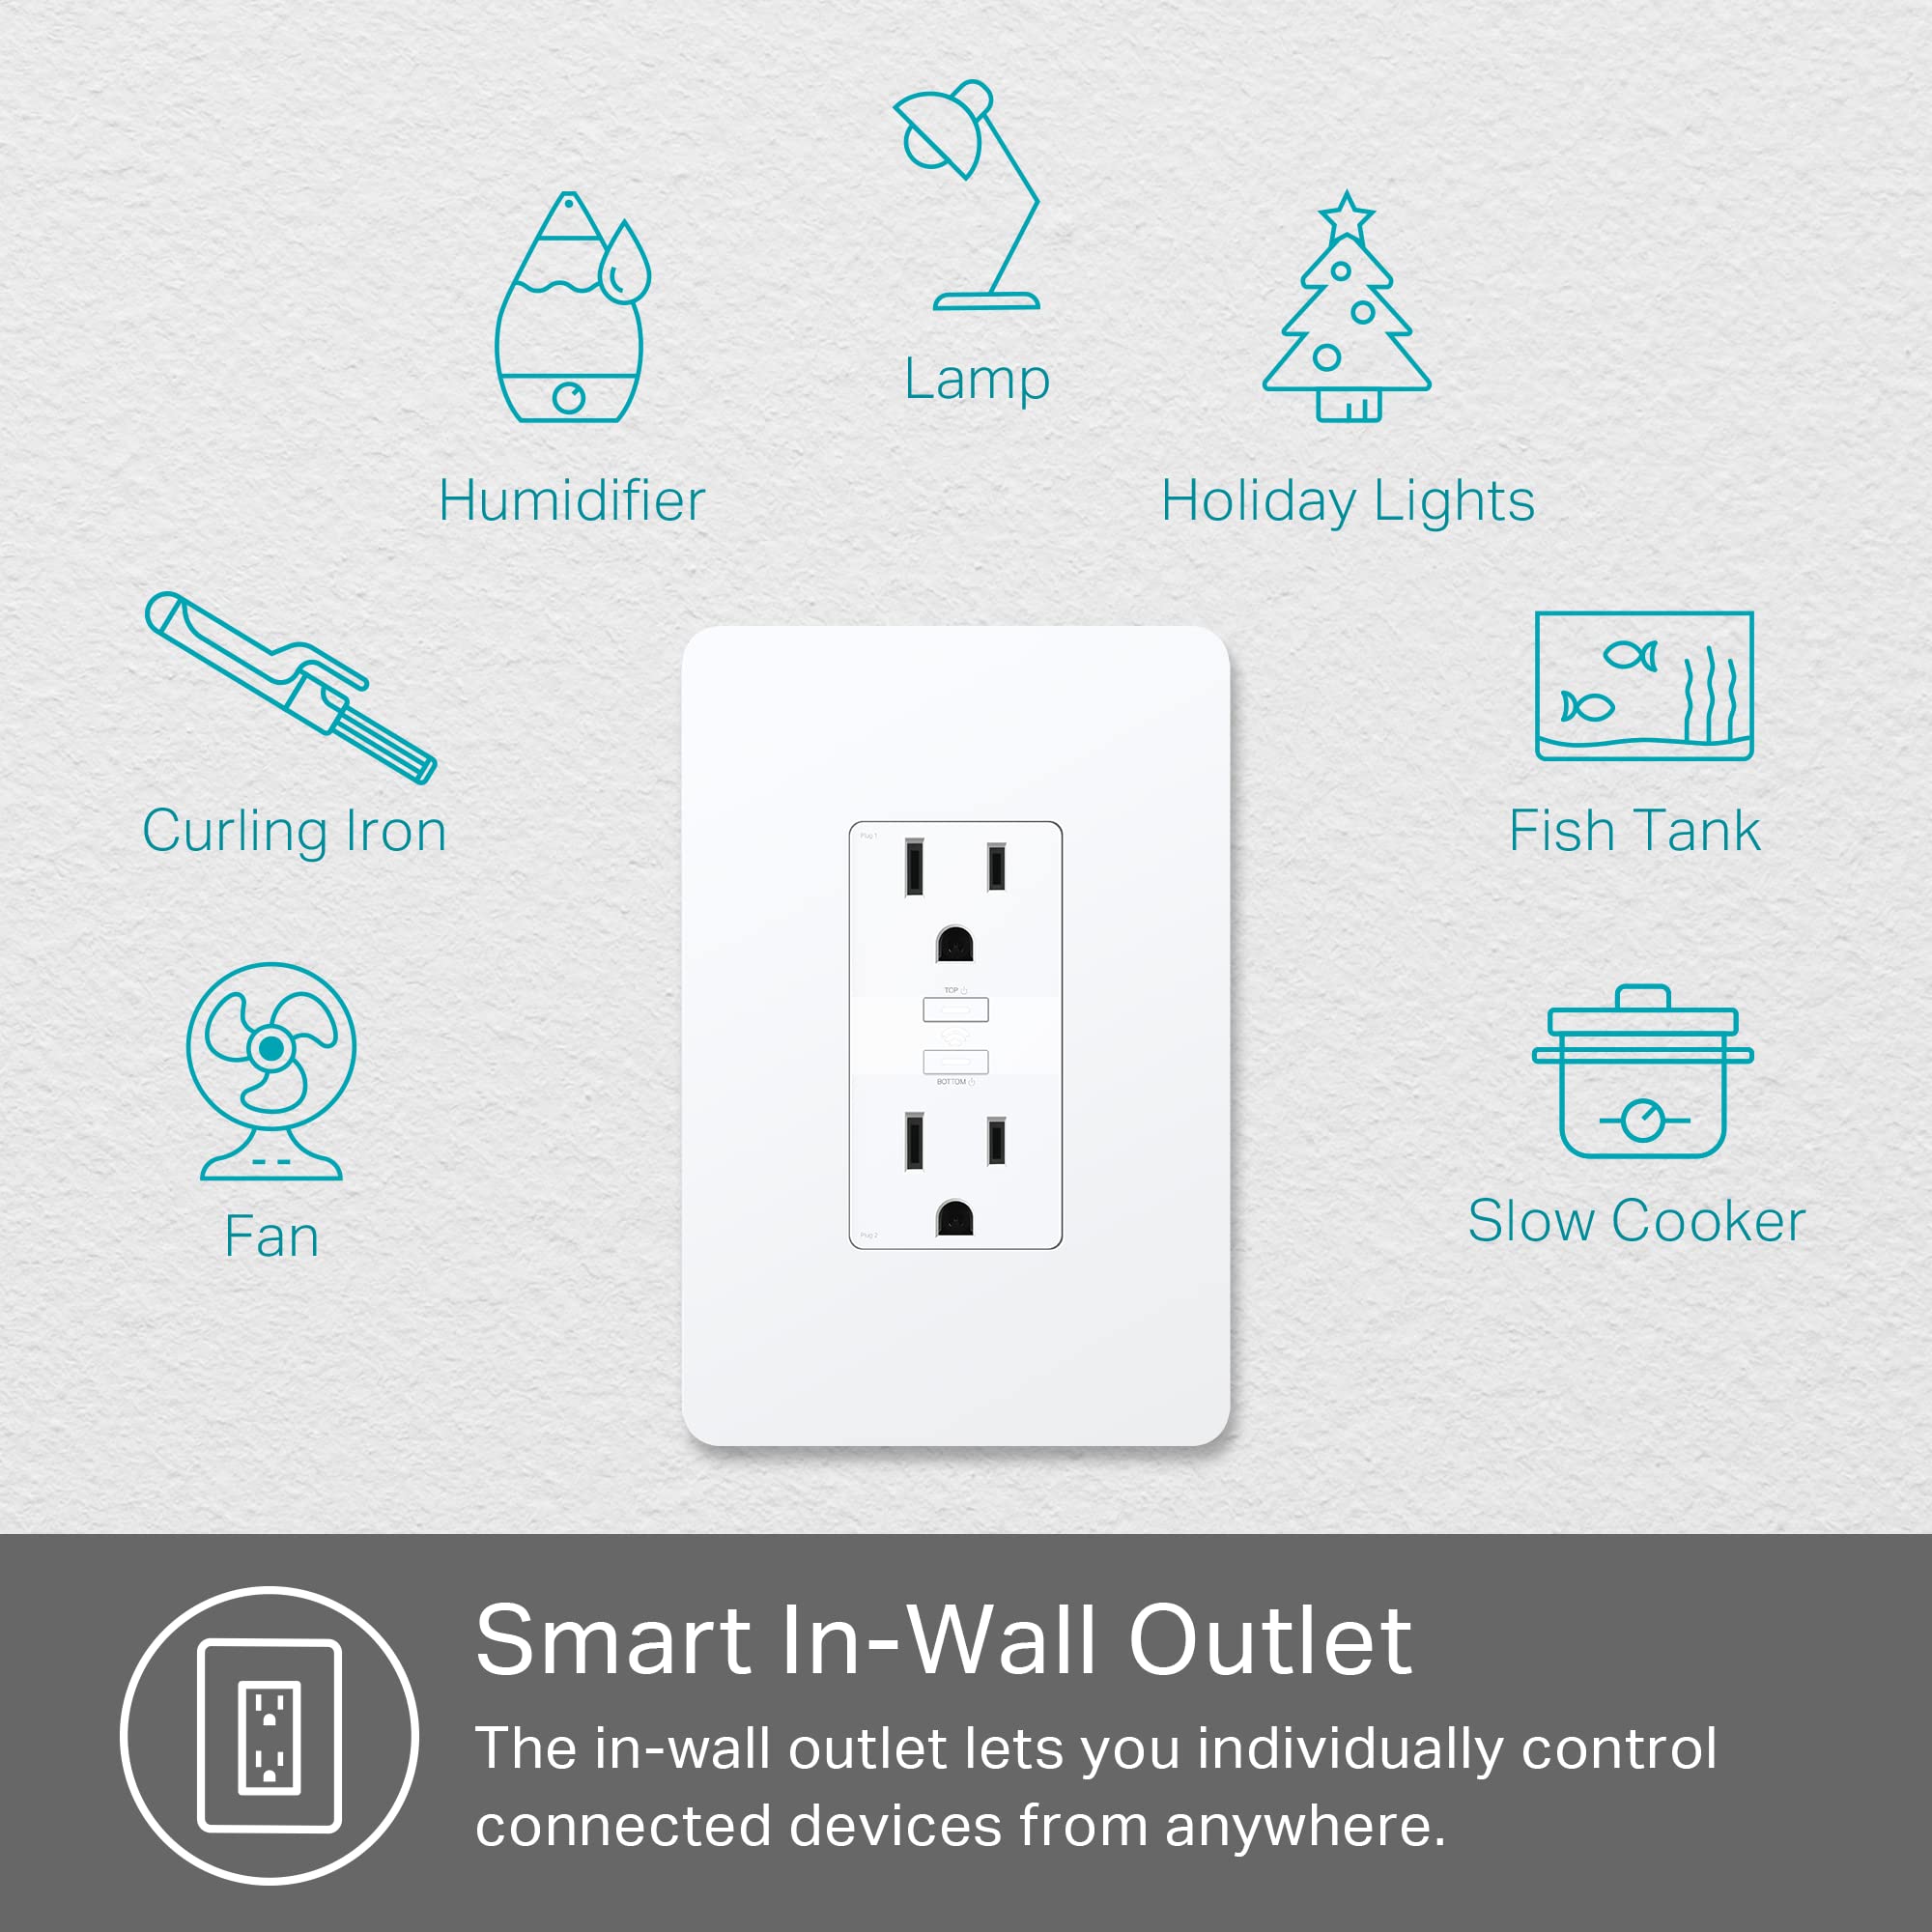 Kasa Smart Plug KP200, In-Wall Smart Home Wi-Fi Outlet Works with Alexa, Google Home & IFTTT, No Hub Required, Remote Control, ETL Certified , White, 1 Pack